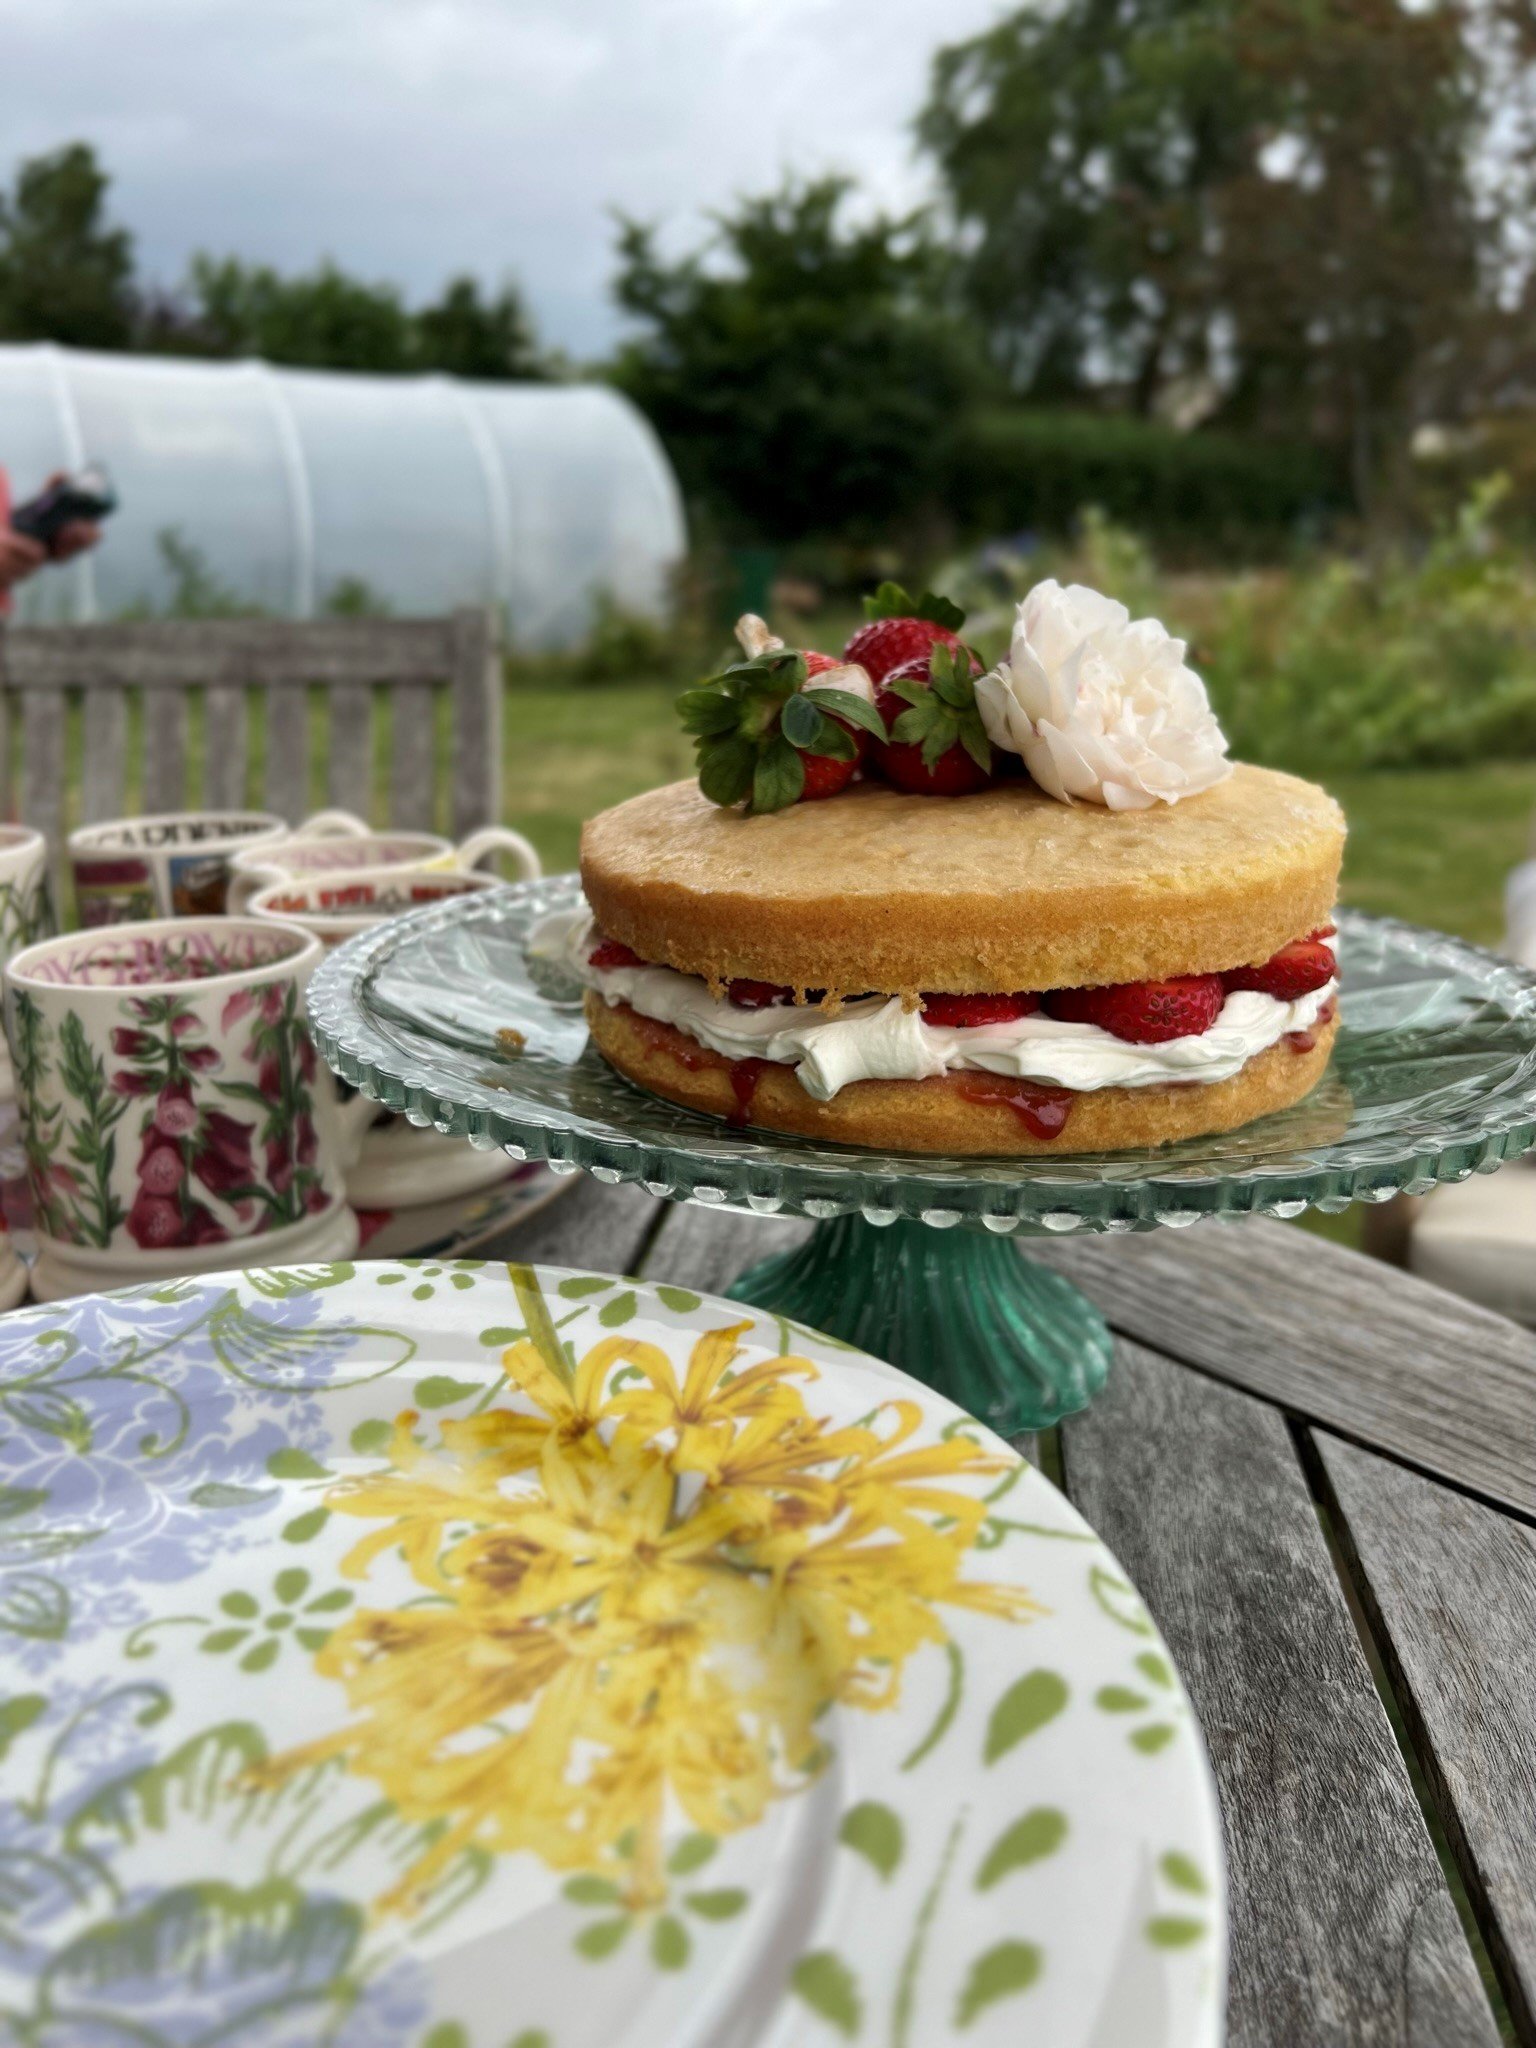 Celebratory cake on the one day British flowers week course 